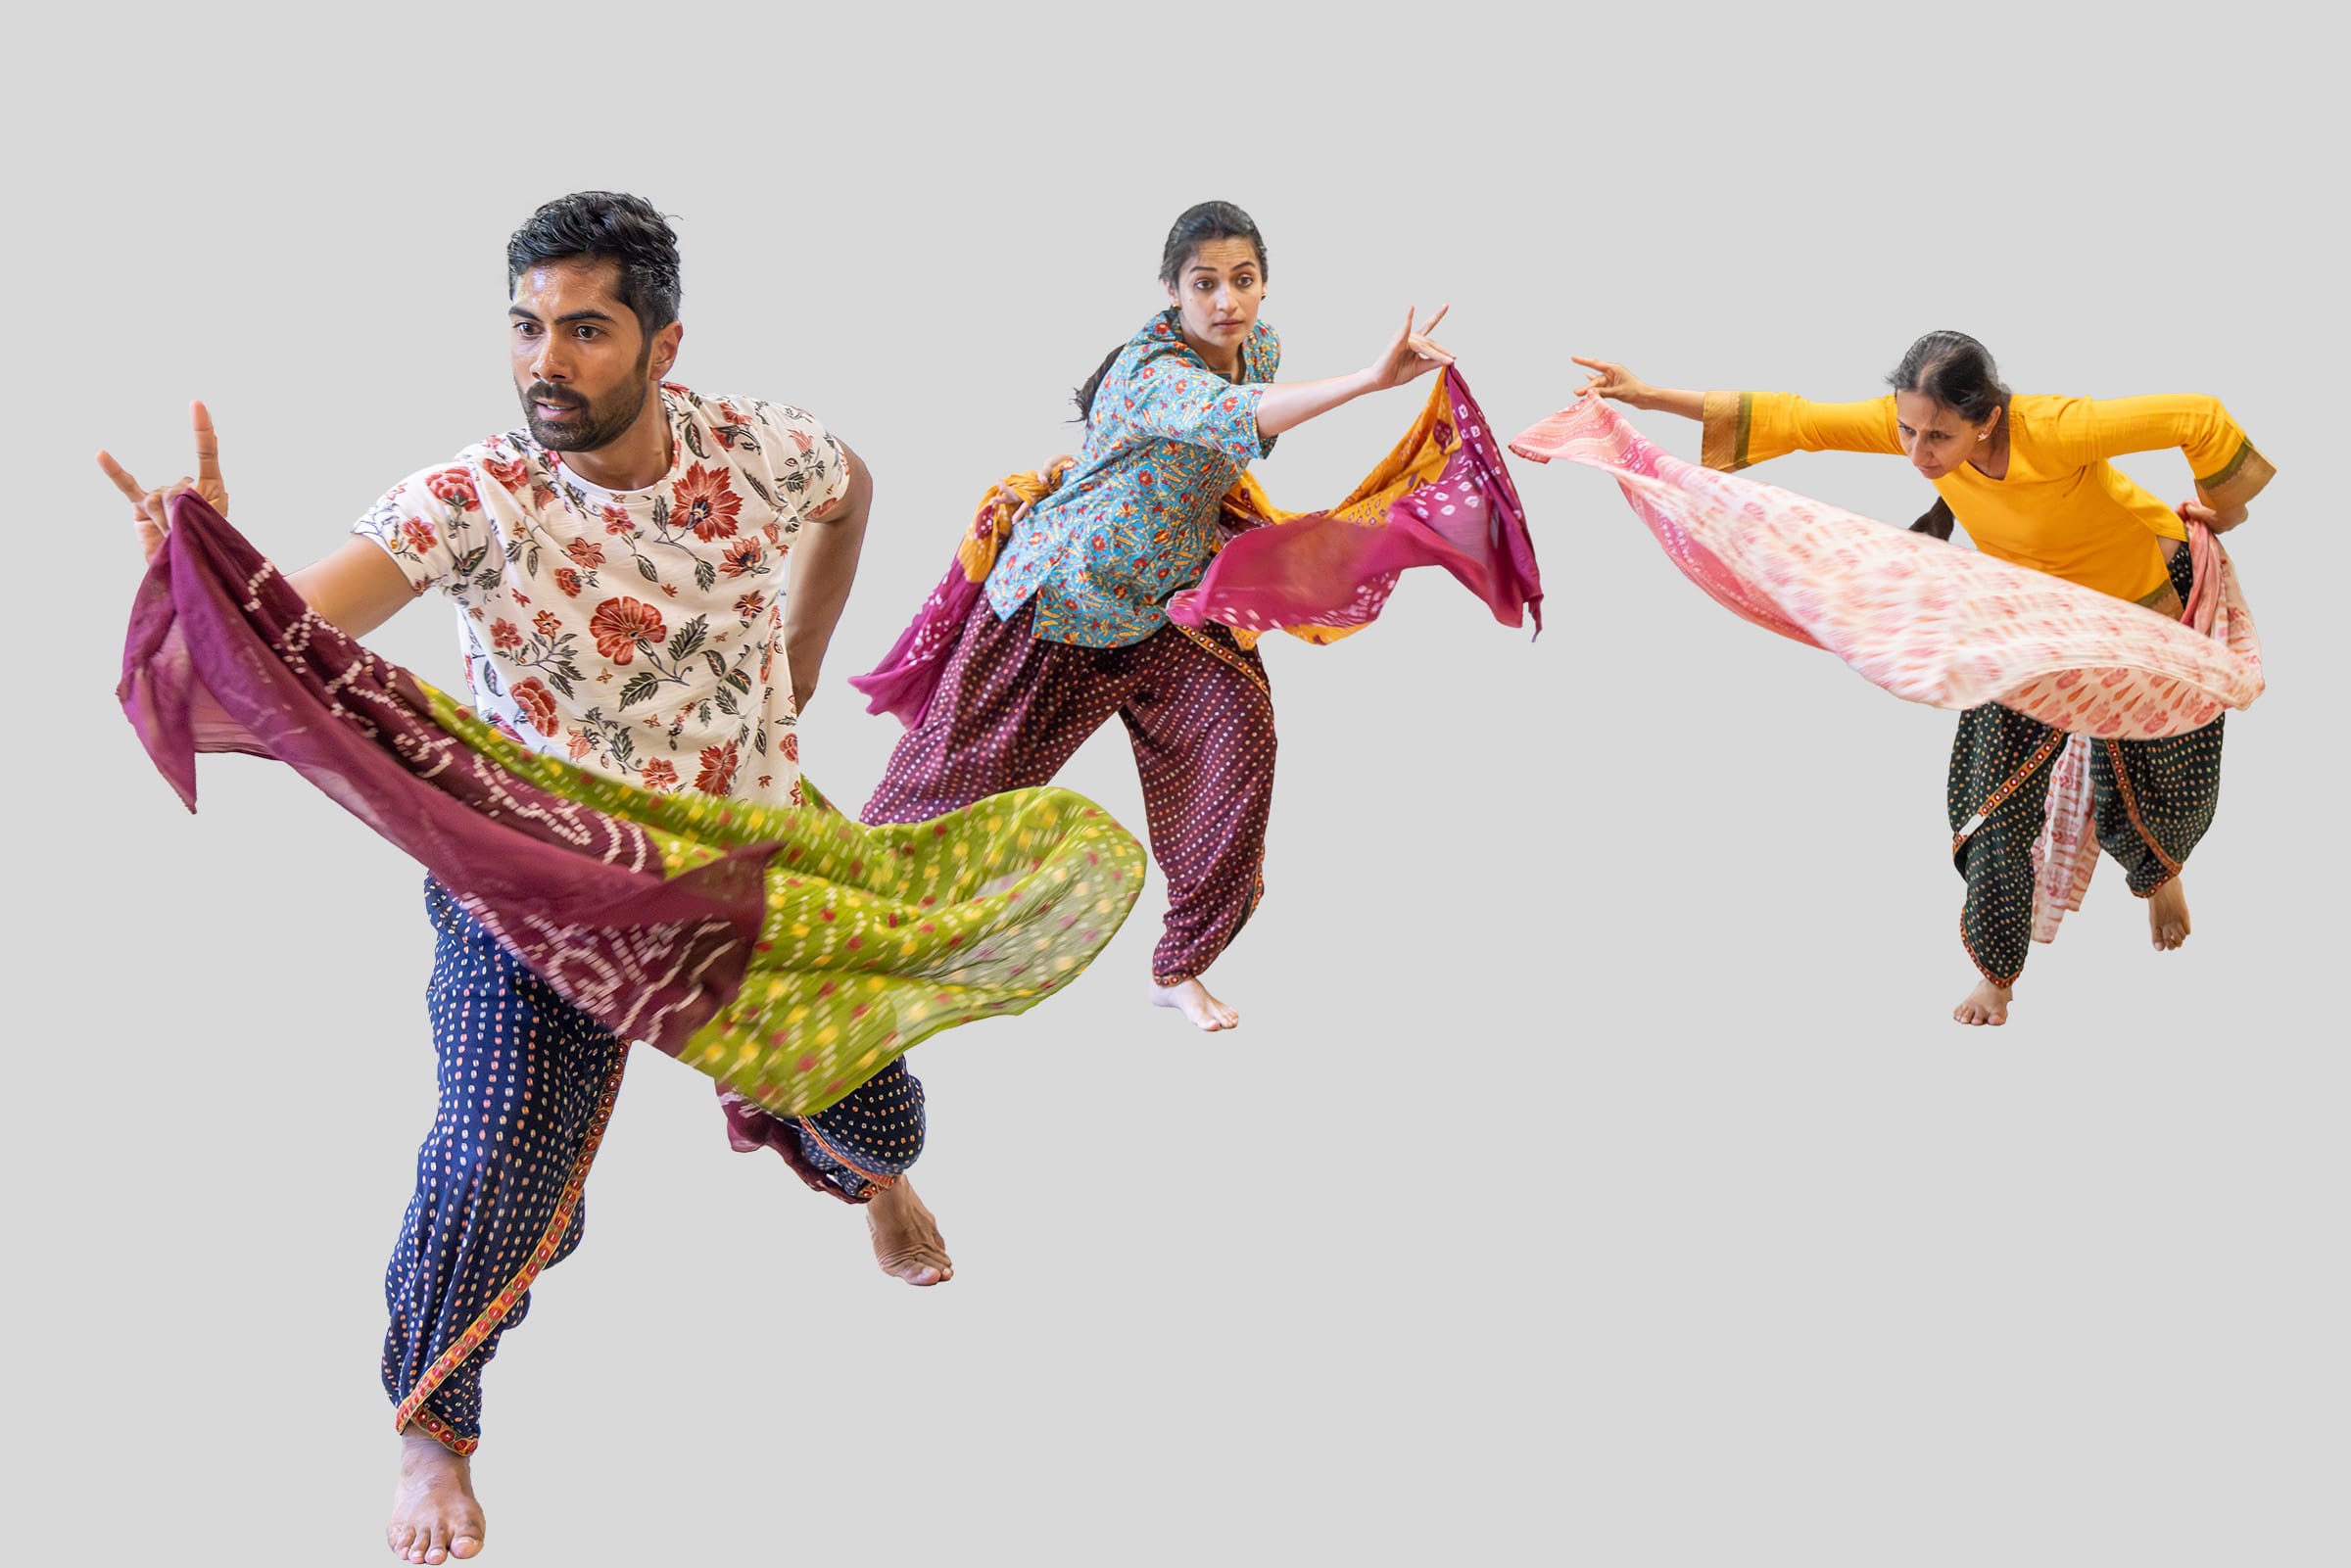 Three Desi performers pose against a white background, holding up colourful silk scarves in purples, greens and pinks.